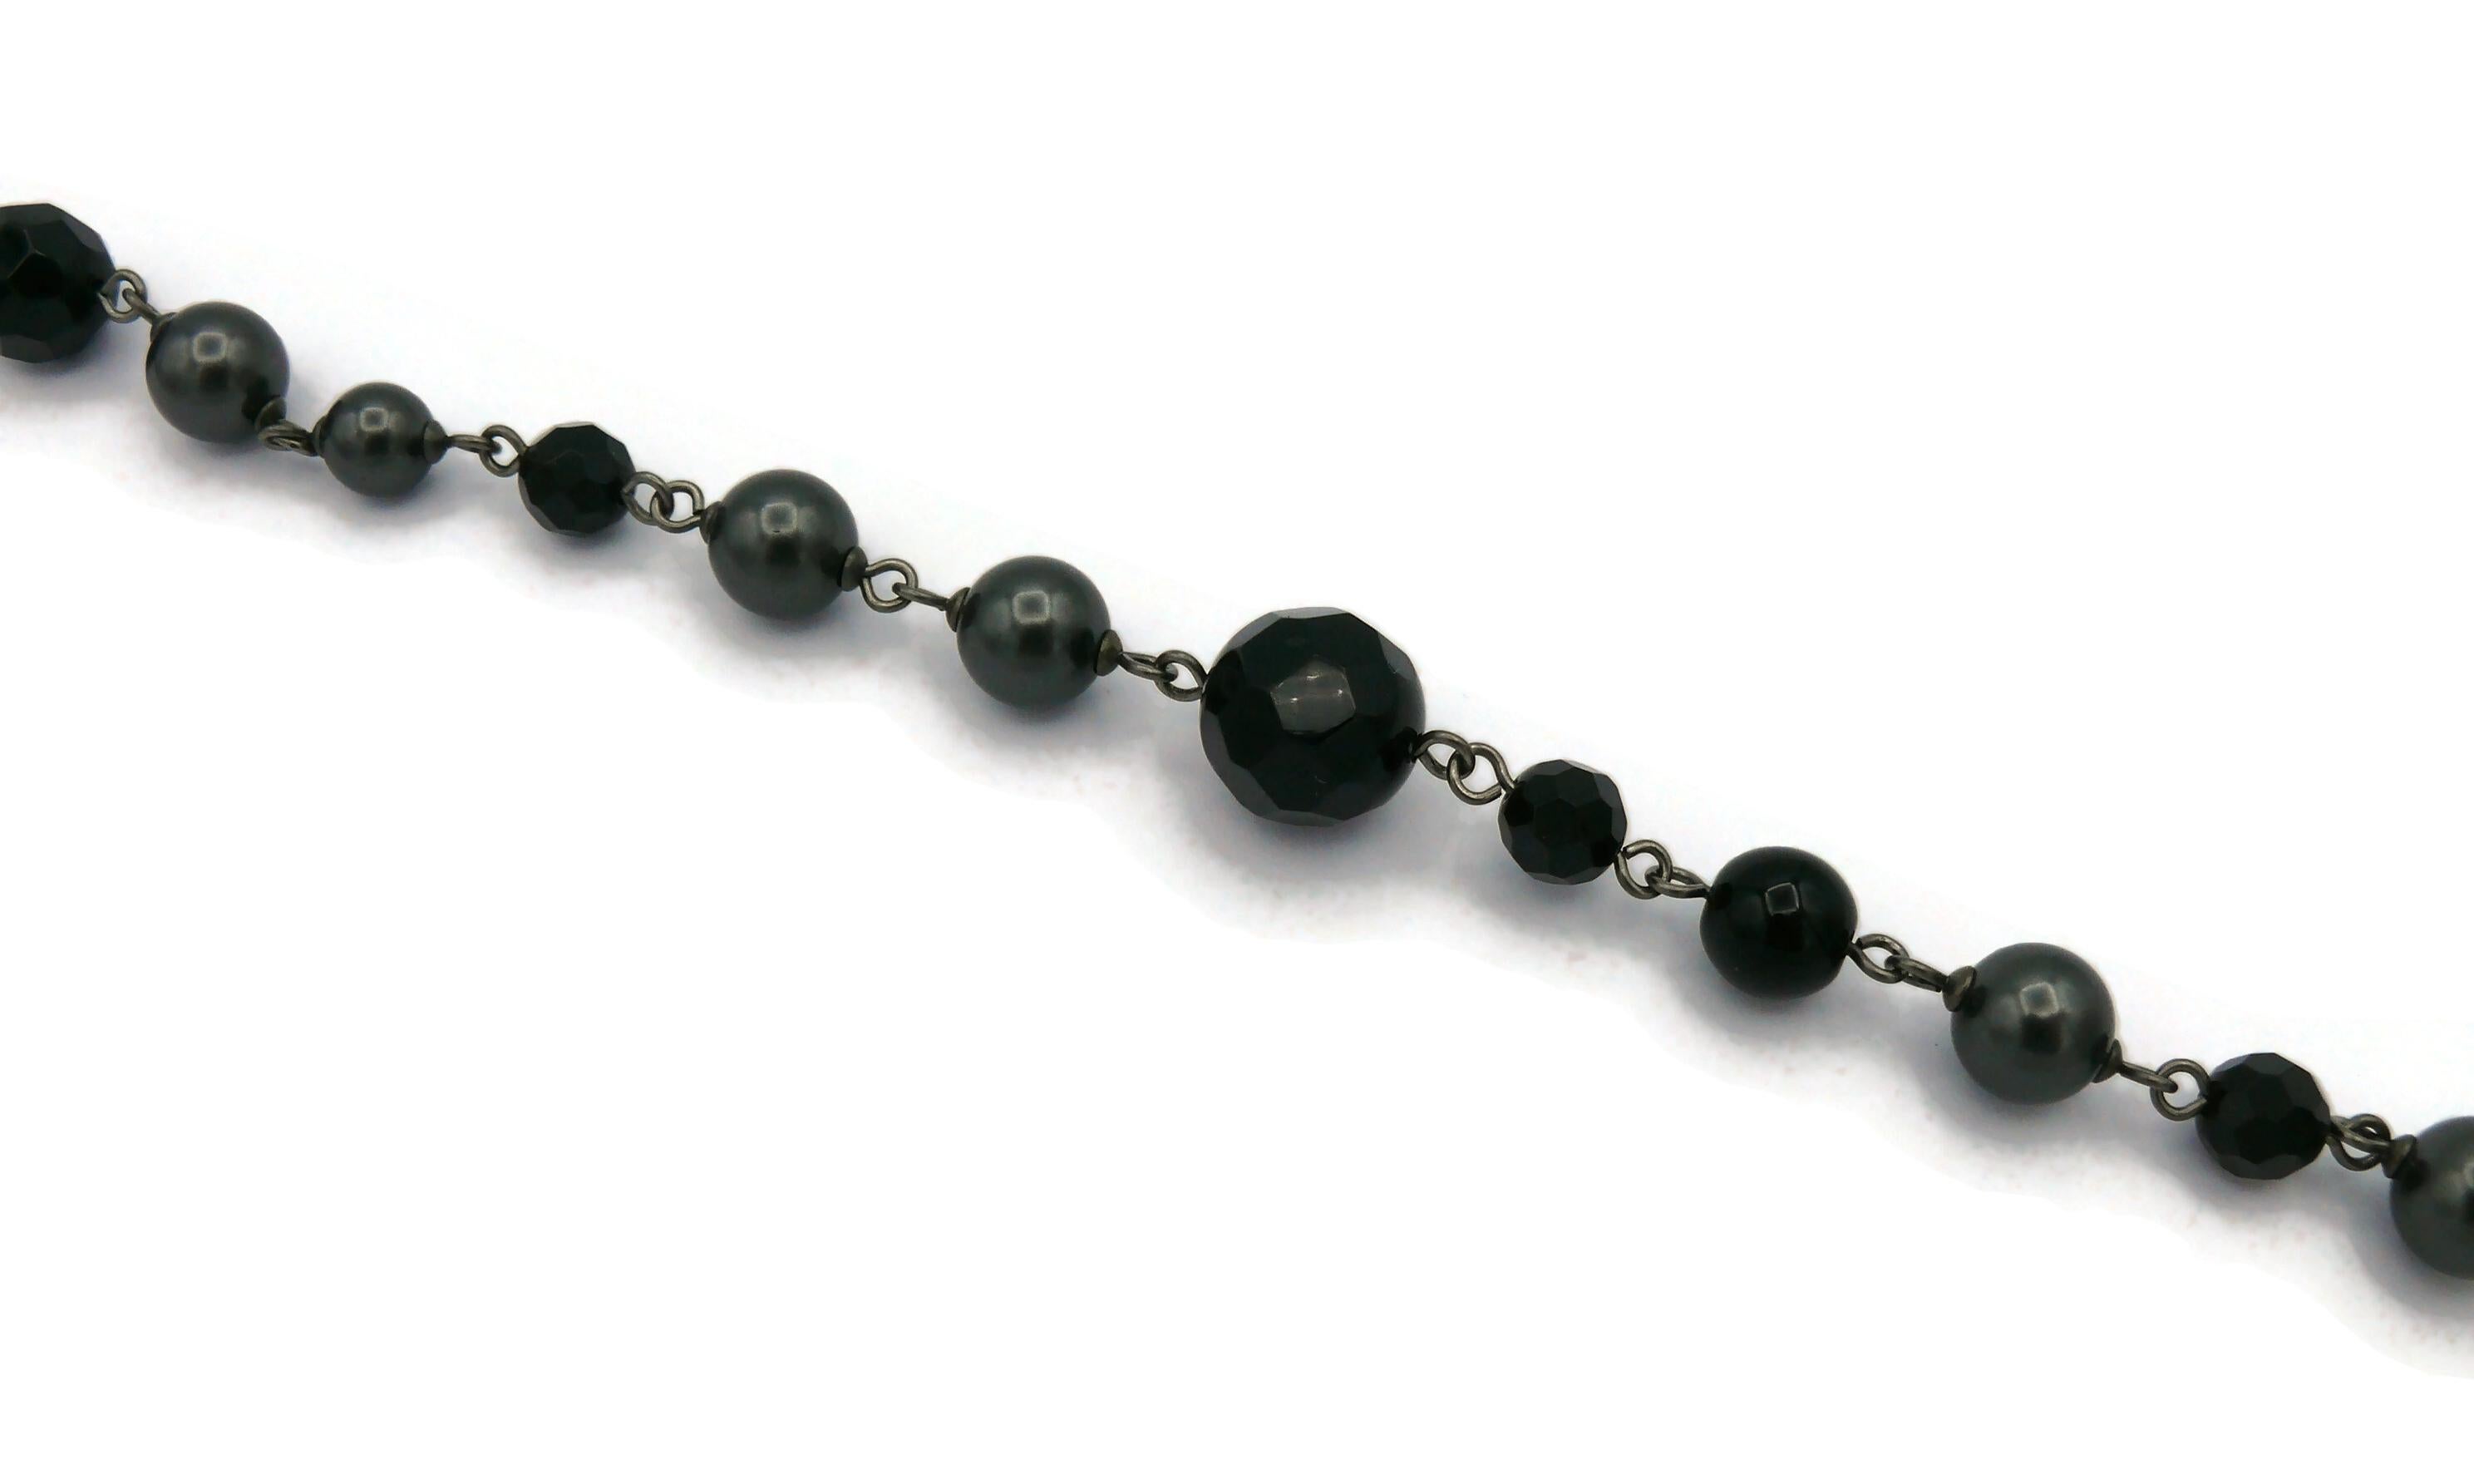 CHANEL by KARL LAGERFELD 2010 Grey Pearl and Black Bead CC Necklace For Sale 5